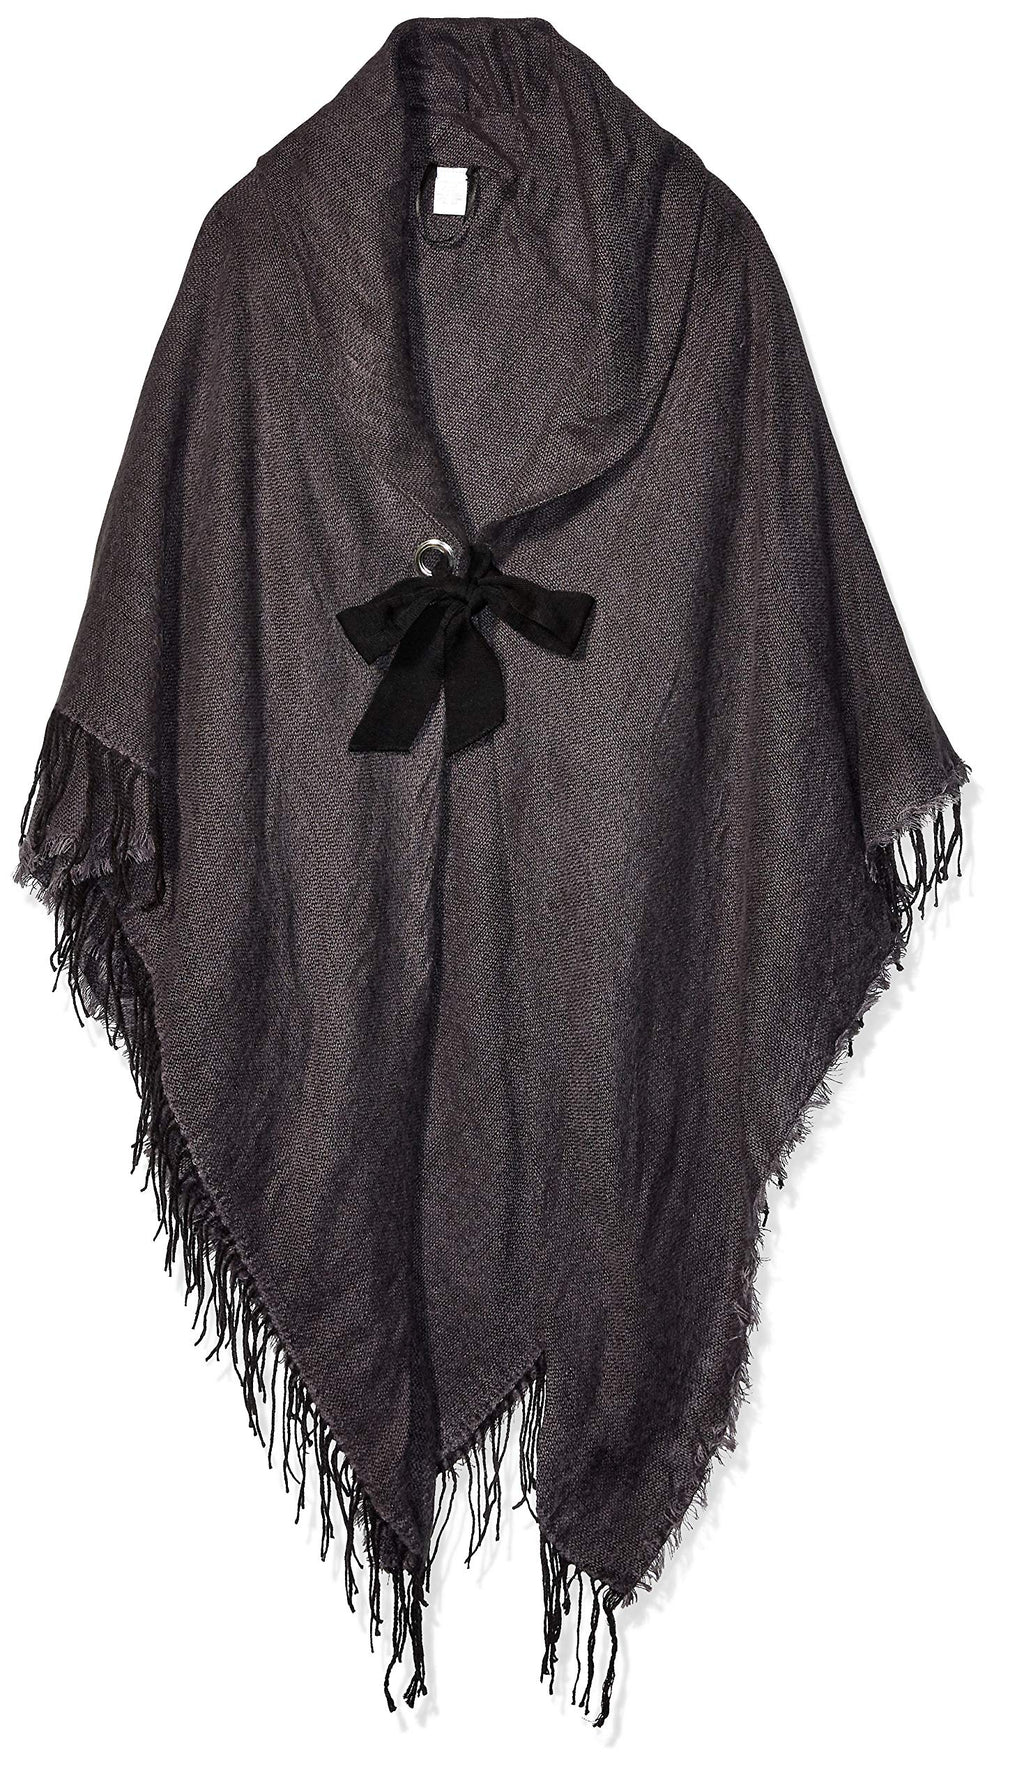 [Australia] - Collection XIIX Women's Heathered Shawl with Tie Closure, charcoal, One Size 